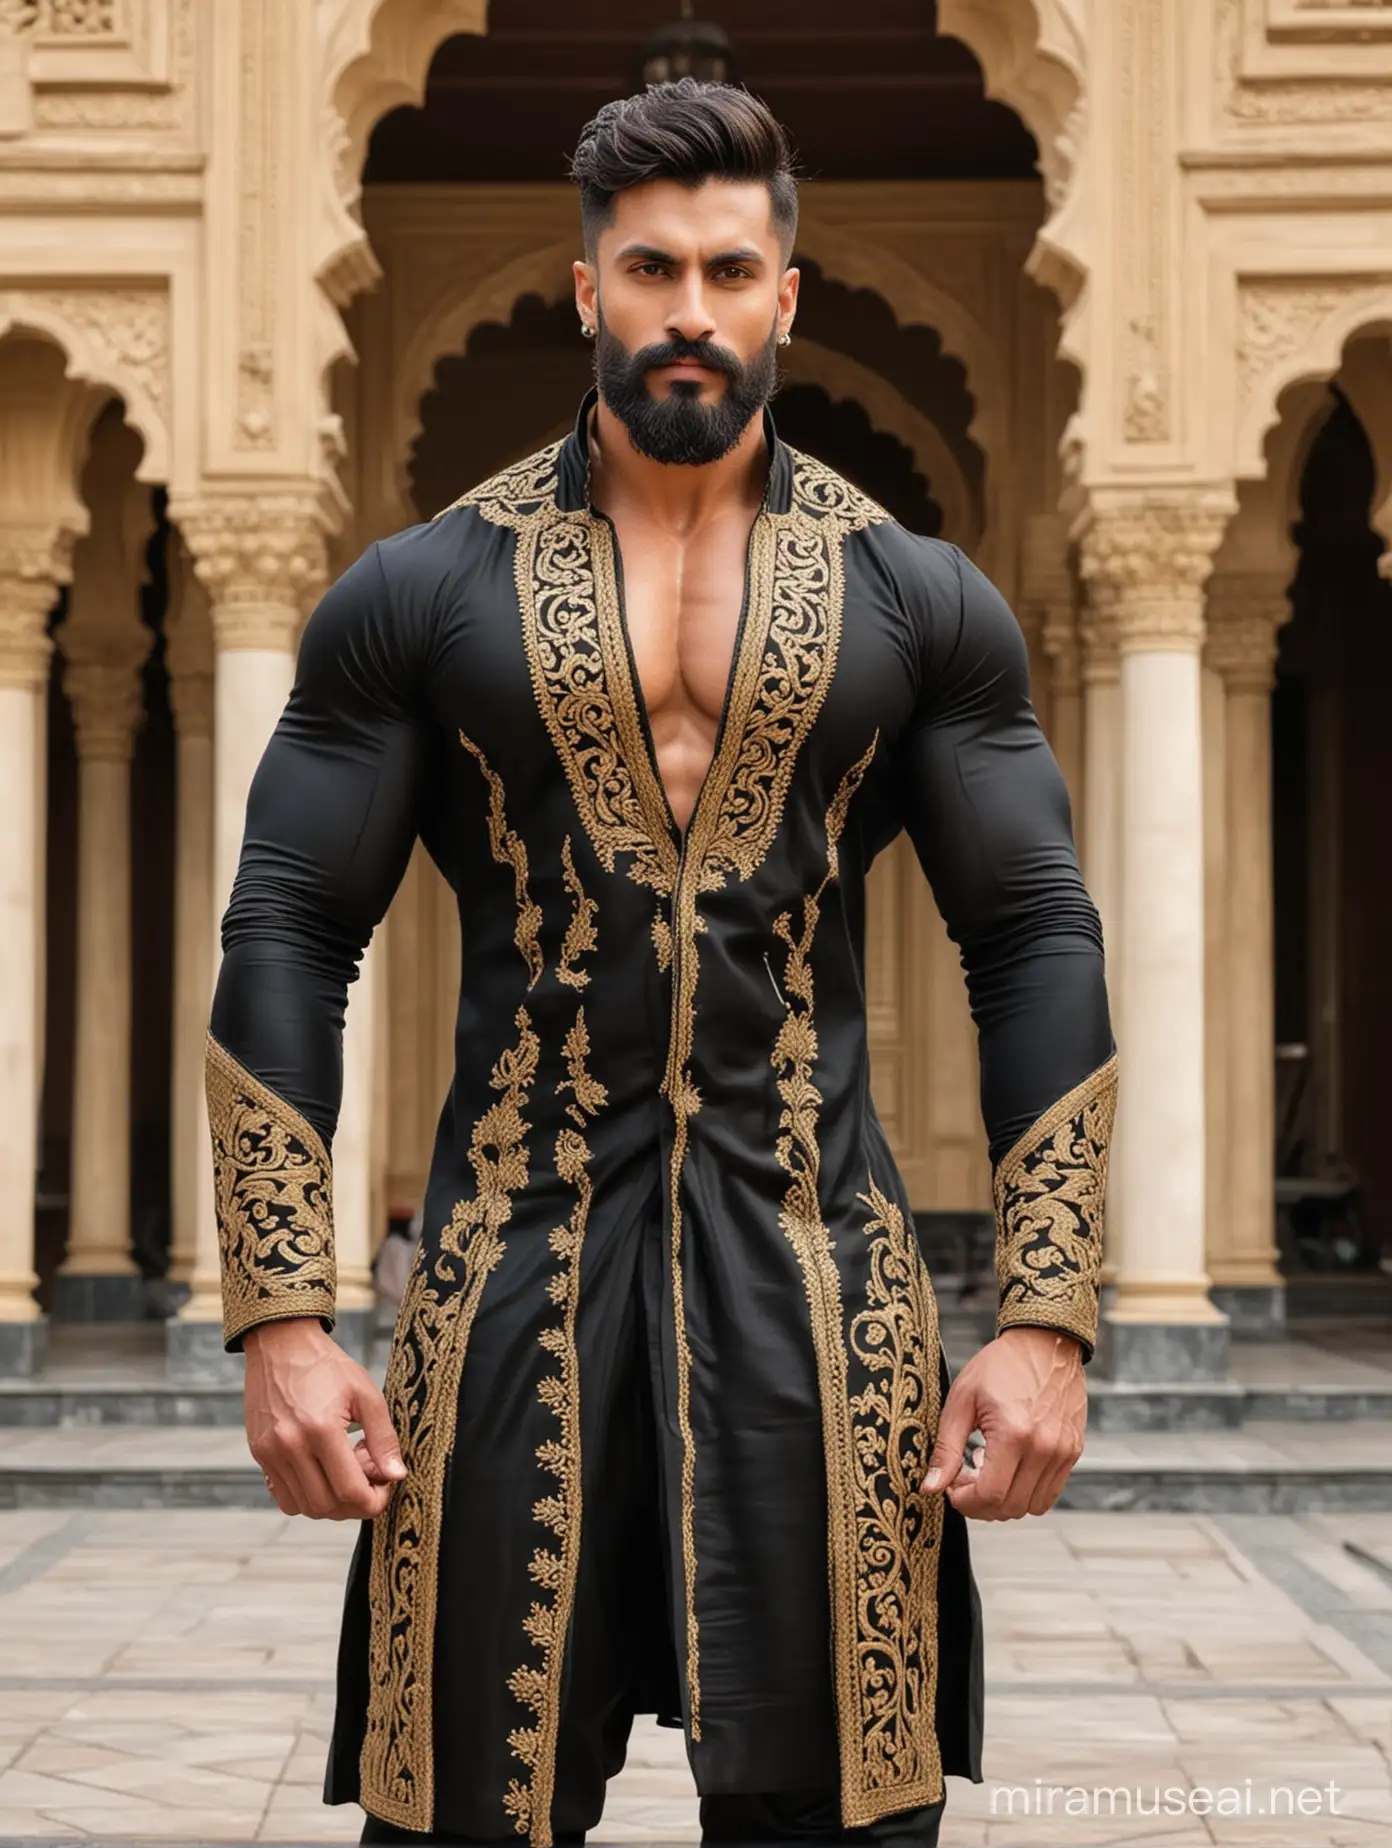 Tall and handsome bodybuilder men with beautiful hairstyle and beard with big wide shoulder and chest in black and golden sherwani and standing outside palace and showing his biceps